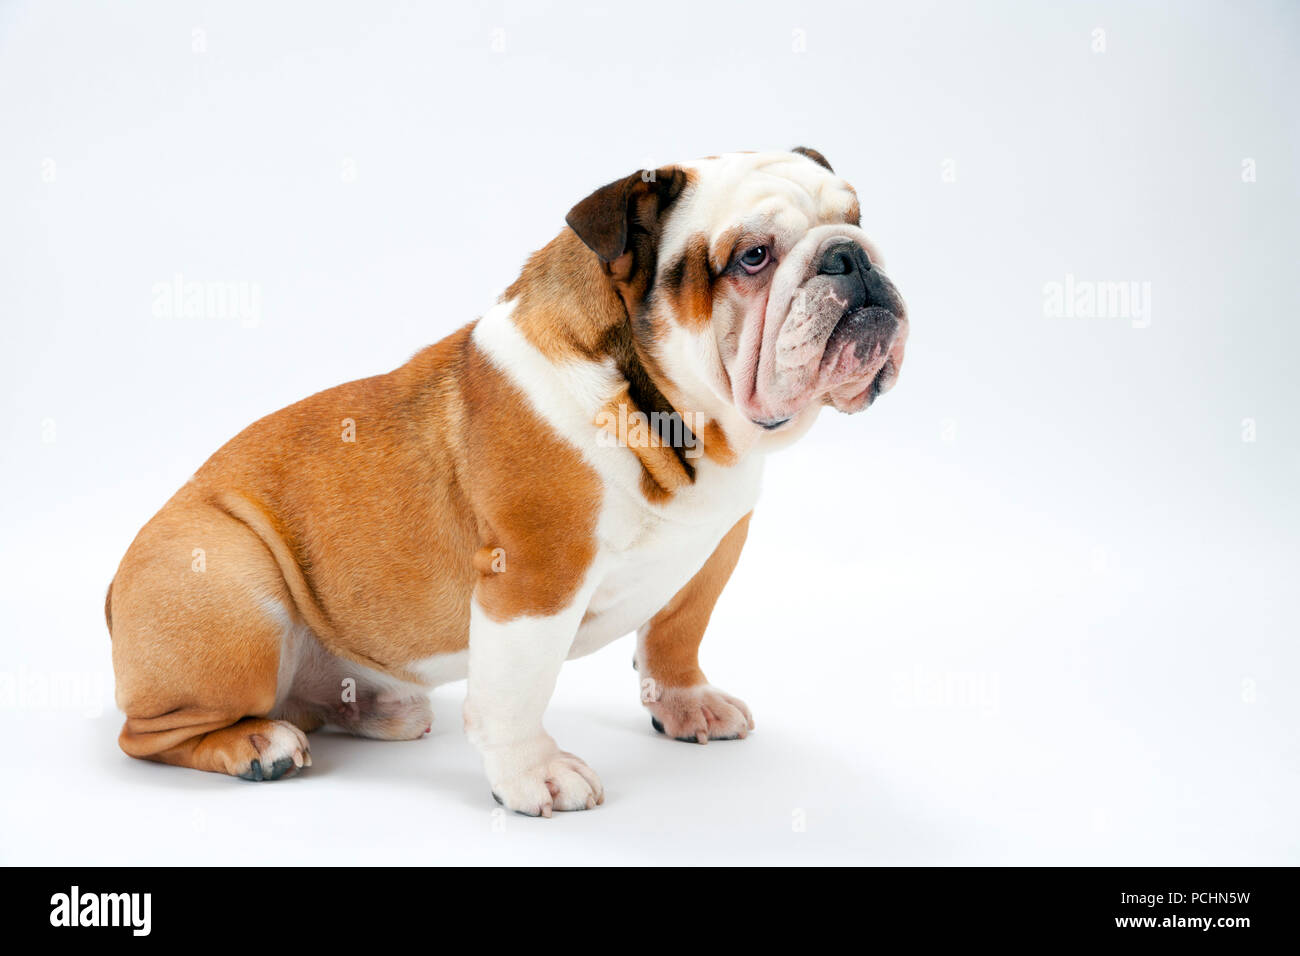 A young British Bulldog waits obediently on a white seamless background for a treat Stock Photo